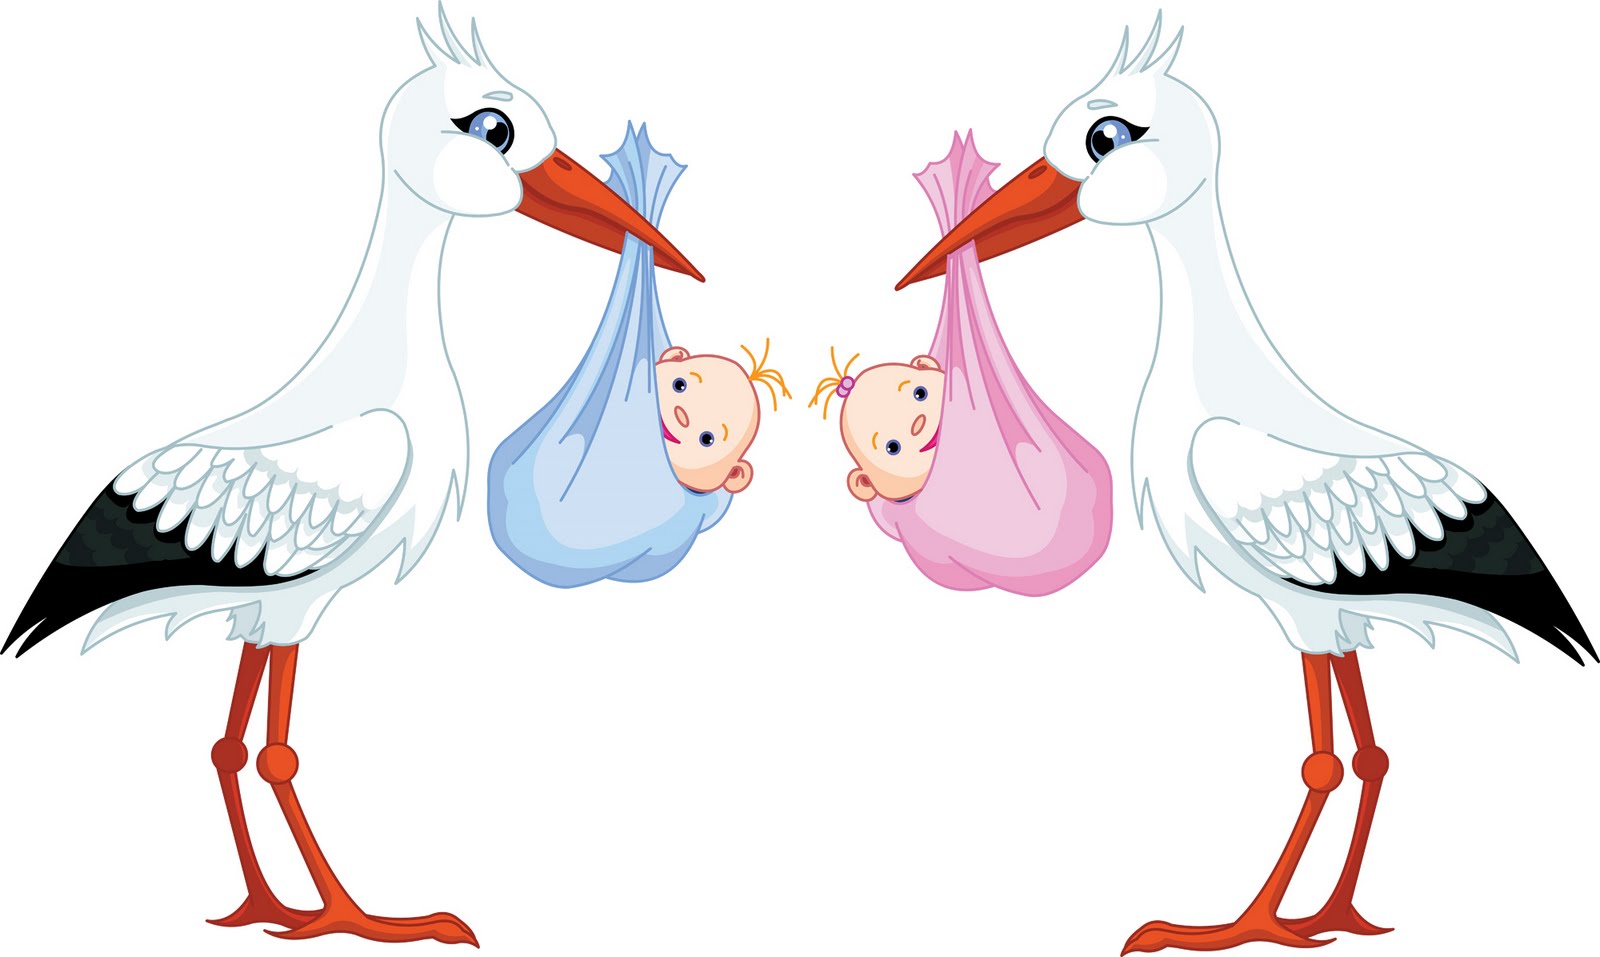 Twins boy and girl baby shower clipart - ClipartFox